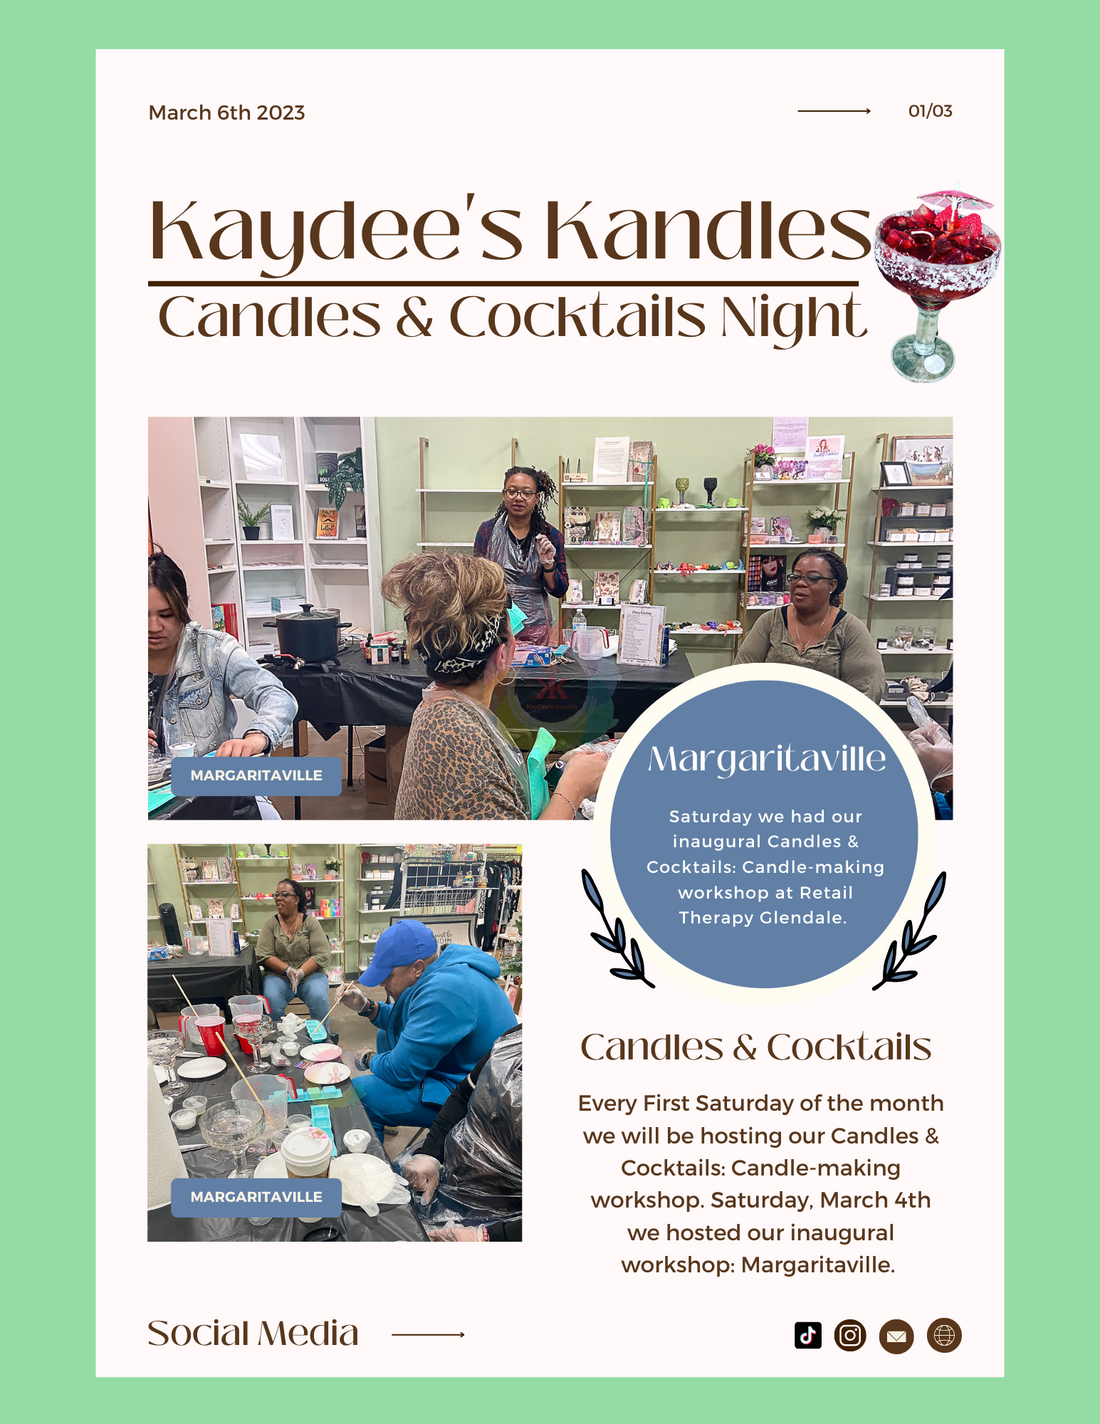 Kaydee's Kandles: Candles & Cocktails Night